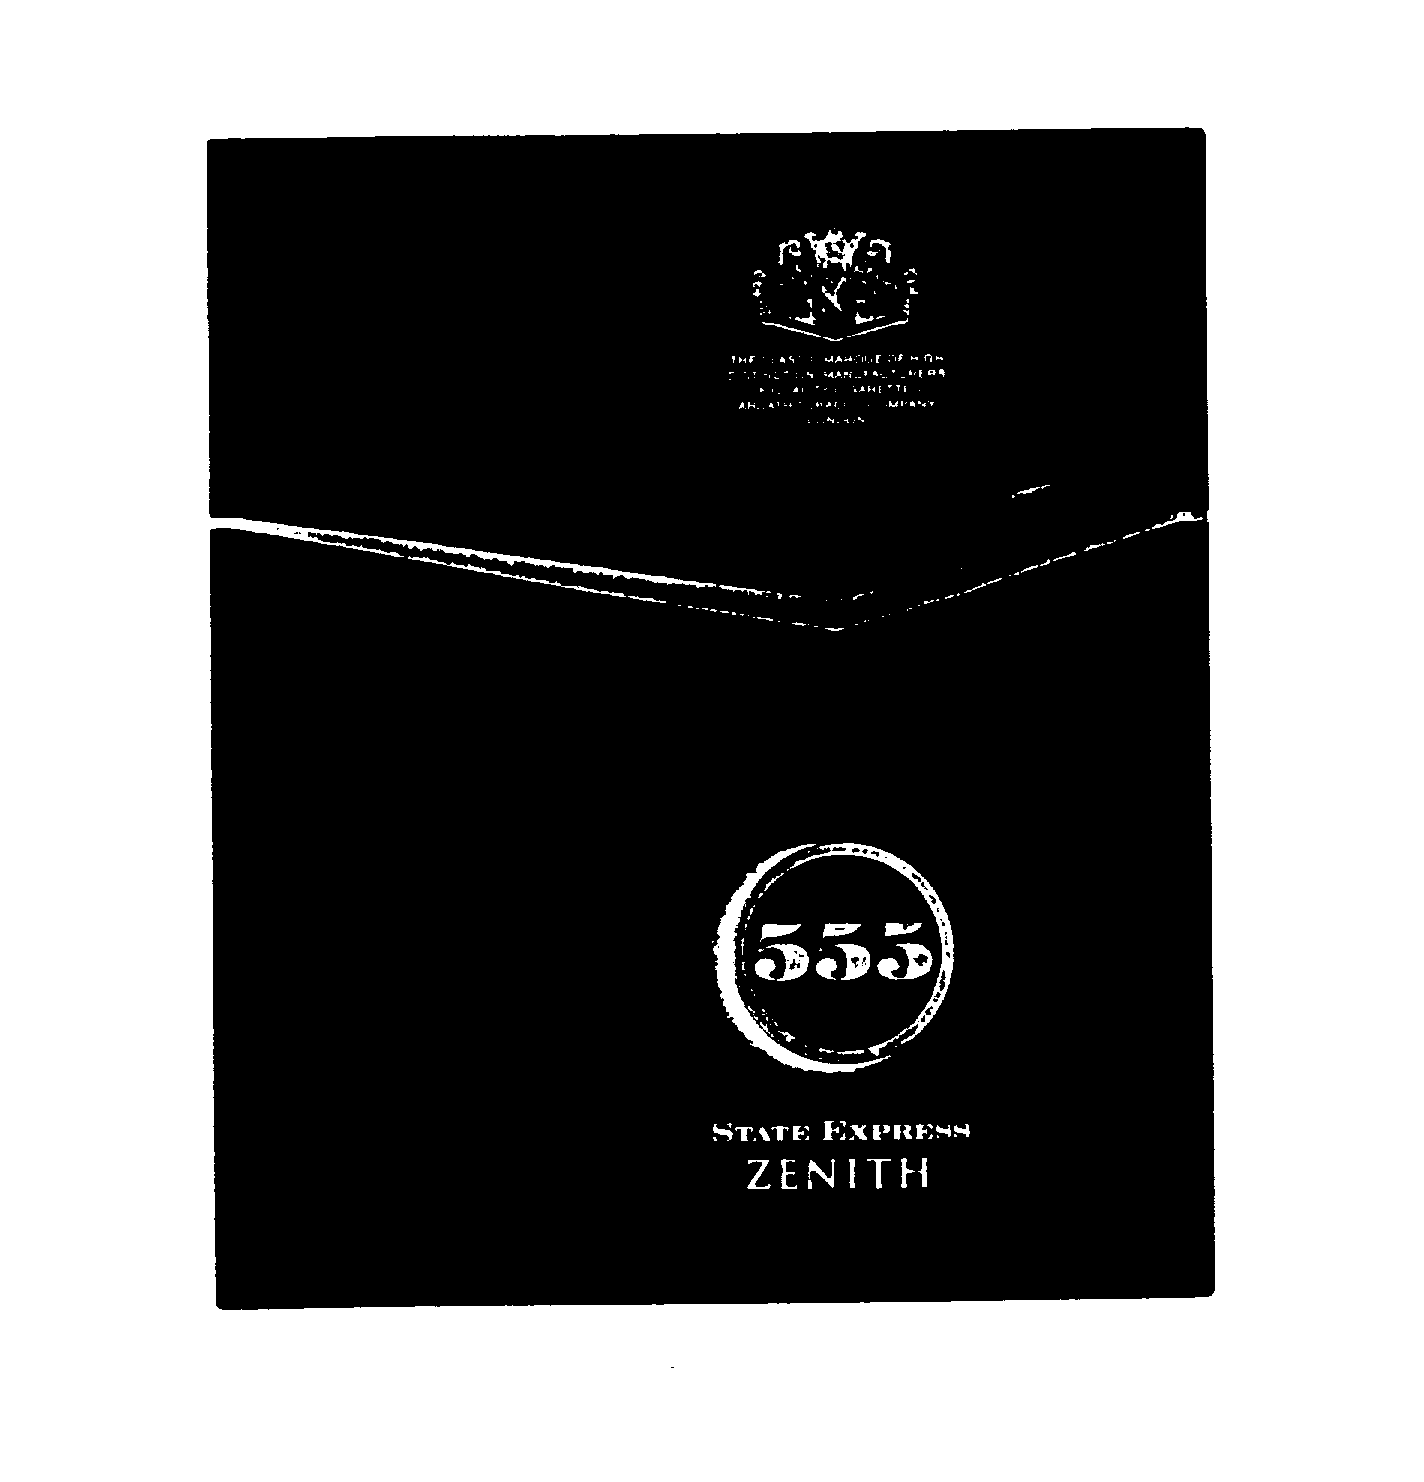 Trademark Logo 555 STATE EXPRESS ZENITH THE CLASSIC MARQUE OF HIGH DISTINCTION MANUFACTURERS OF QUALITY CIGARETTES ARDATH TOBACCO COMPANY LONDON